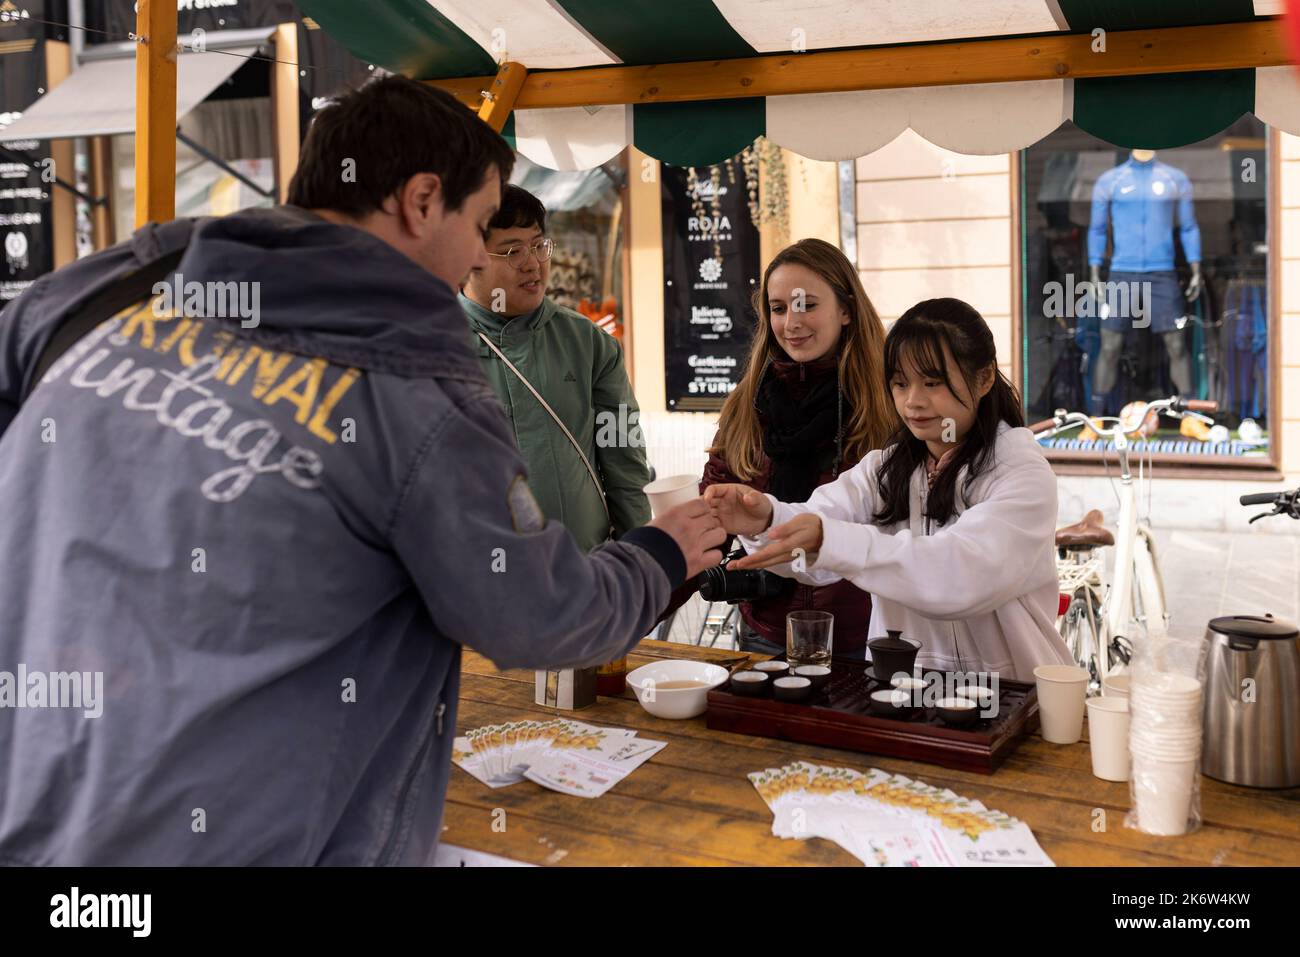 Ljubljana, Slovenia. 15th Oct, 2022. A staff member serves a cup of Chinese tea to a visitor at a charity event in Ljubljana, Slovenia, Oct. 15, 2022. The Confucius Institute in Ljubljana on Saturday showcased Chinese culture at a charity event held in the capital of Slovenia. Visitors had the chance to taste Chinese tea, experience Chinese calligraphy, and put on Hanfu, traditional Chinese clothing, to take photos at the event, which aims at raising fund for Slovenian children in need. Credit: Zeljko Stevanic/Xinhua/Alamy Live News Stock Photo